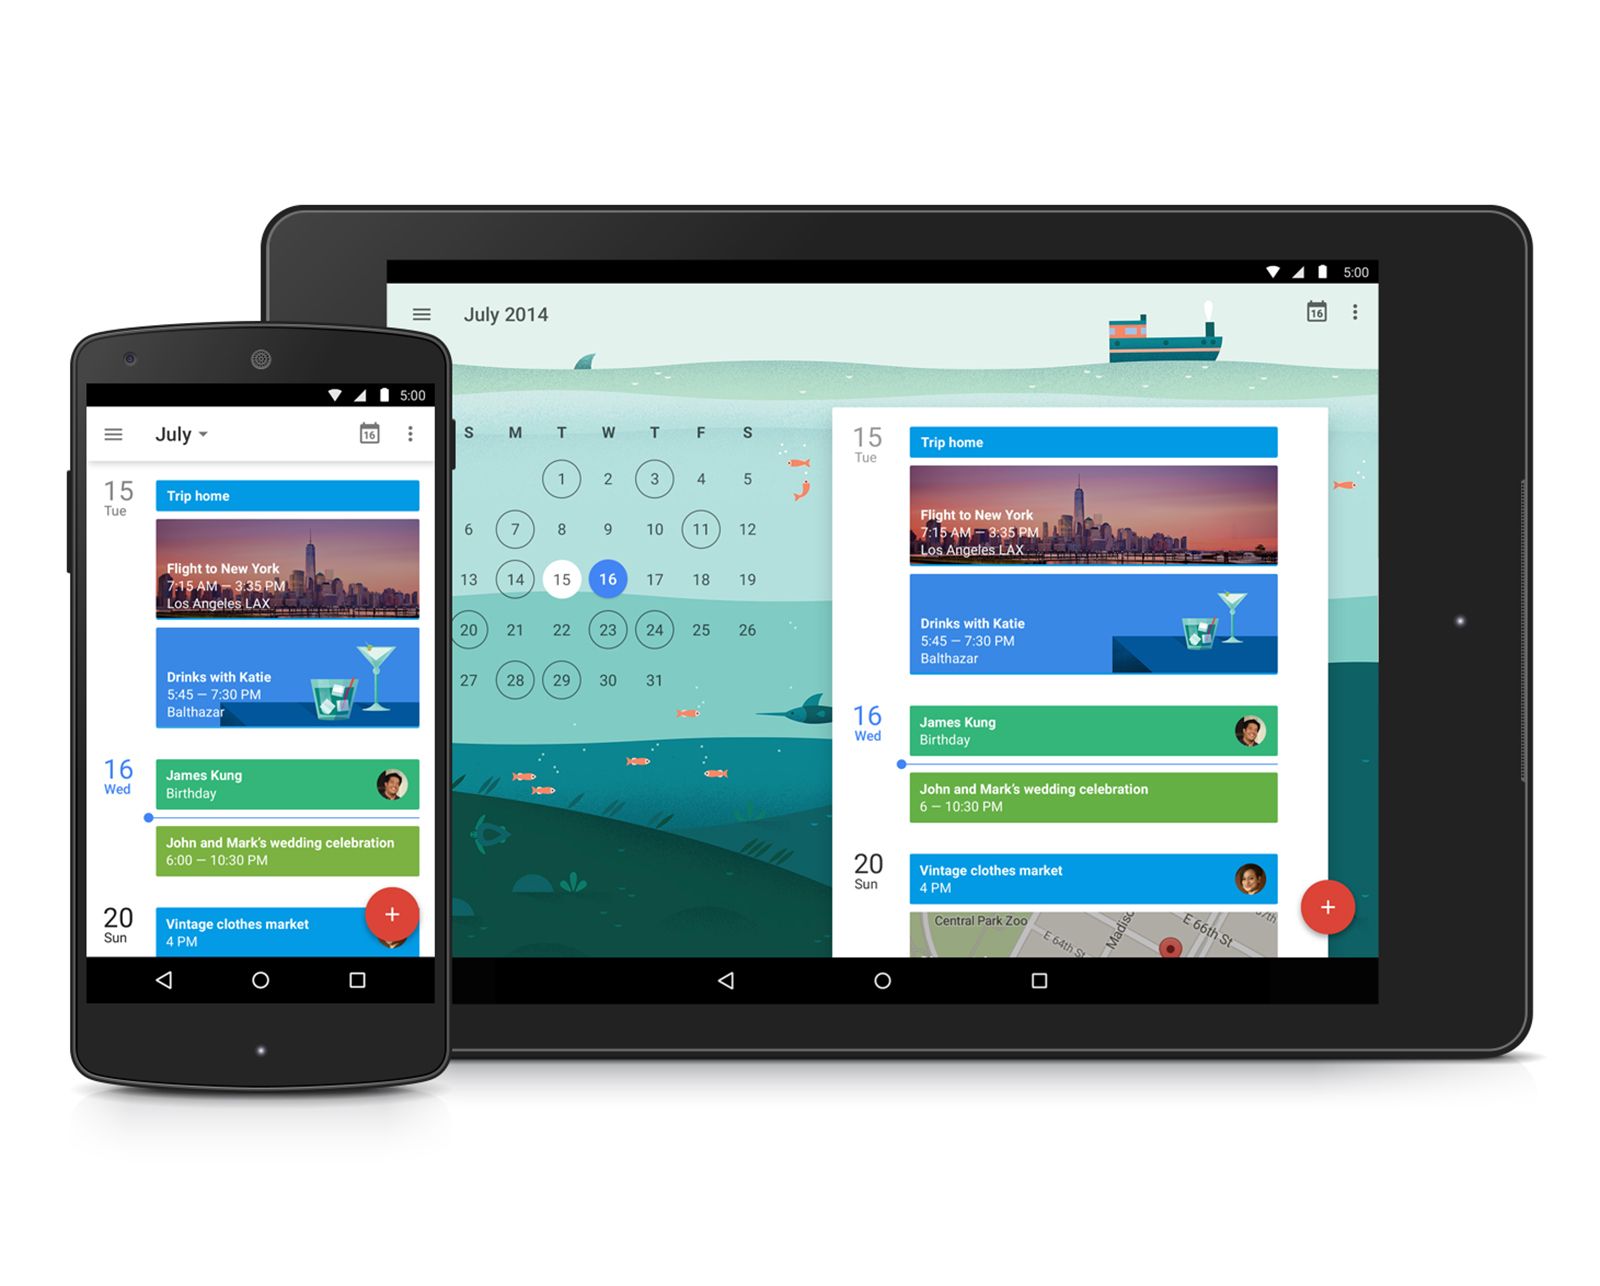 google calendar for android gets all new look with iphone version coming soon image 1